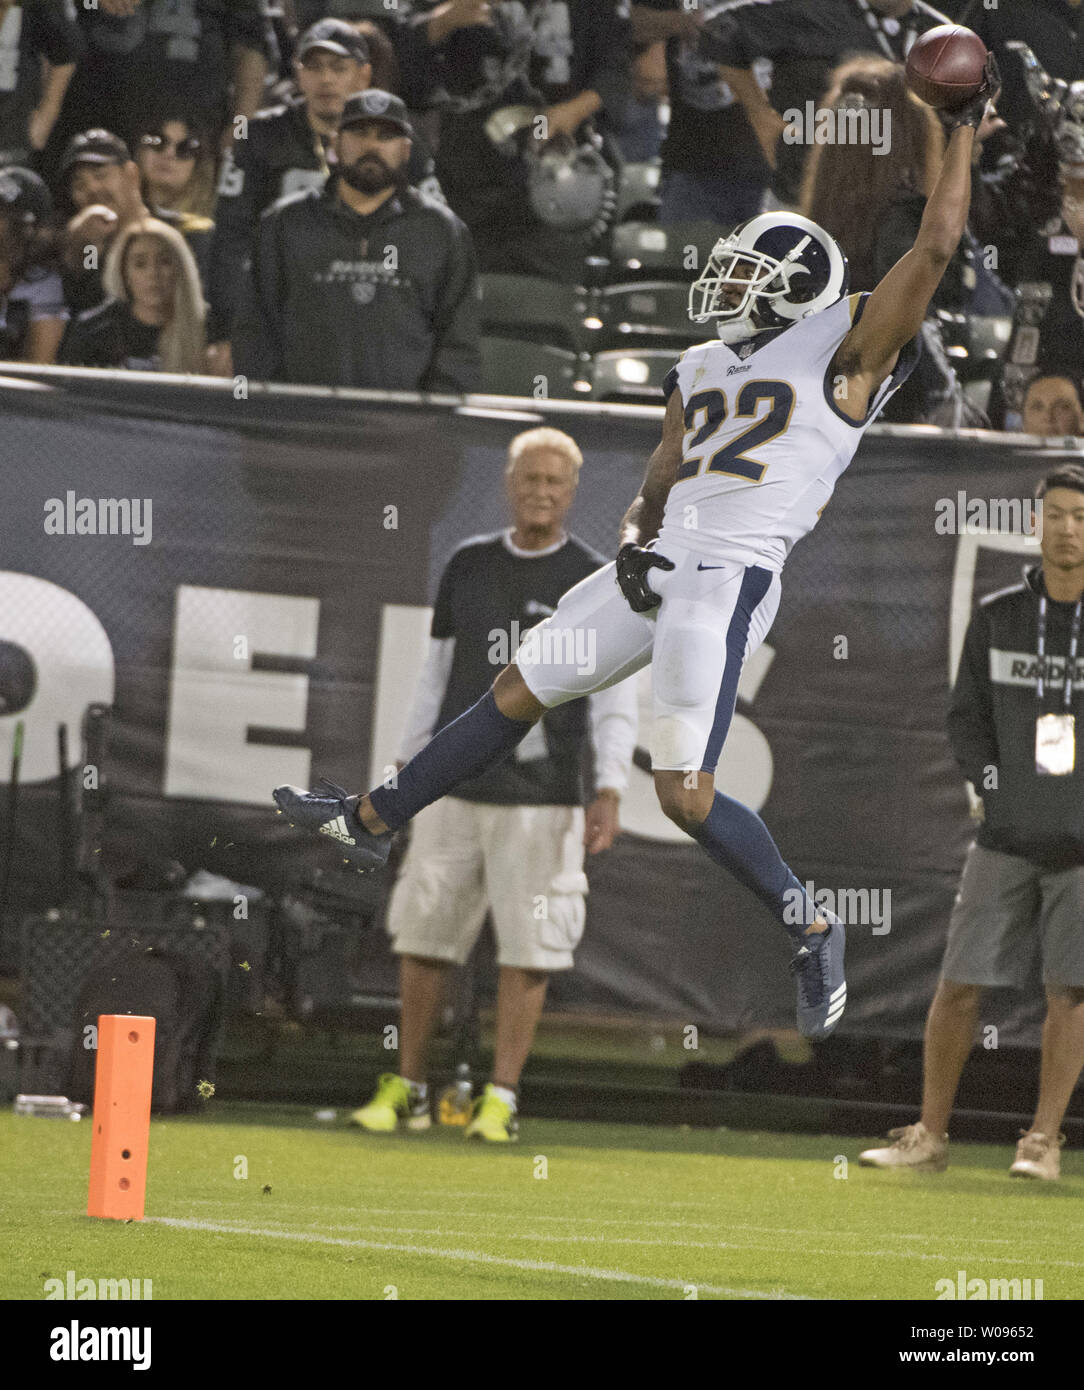 Los Angeles Rams Marcus Peters (22) leaps backwards across the goal line while grabbing his crotch to celebrate a pick 6 against Oakland Raiders QB Derek Carr in the fourth quarter at the Coliseum in Oakland, California on Monday, September 10, 2018. The Rams defeated the Raiders 33-13.       Photo by Terry Schmitt/UPI Stock Photo